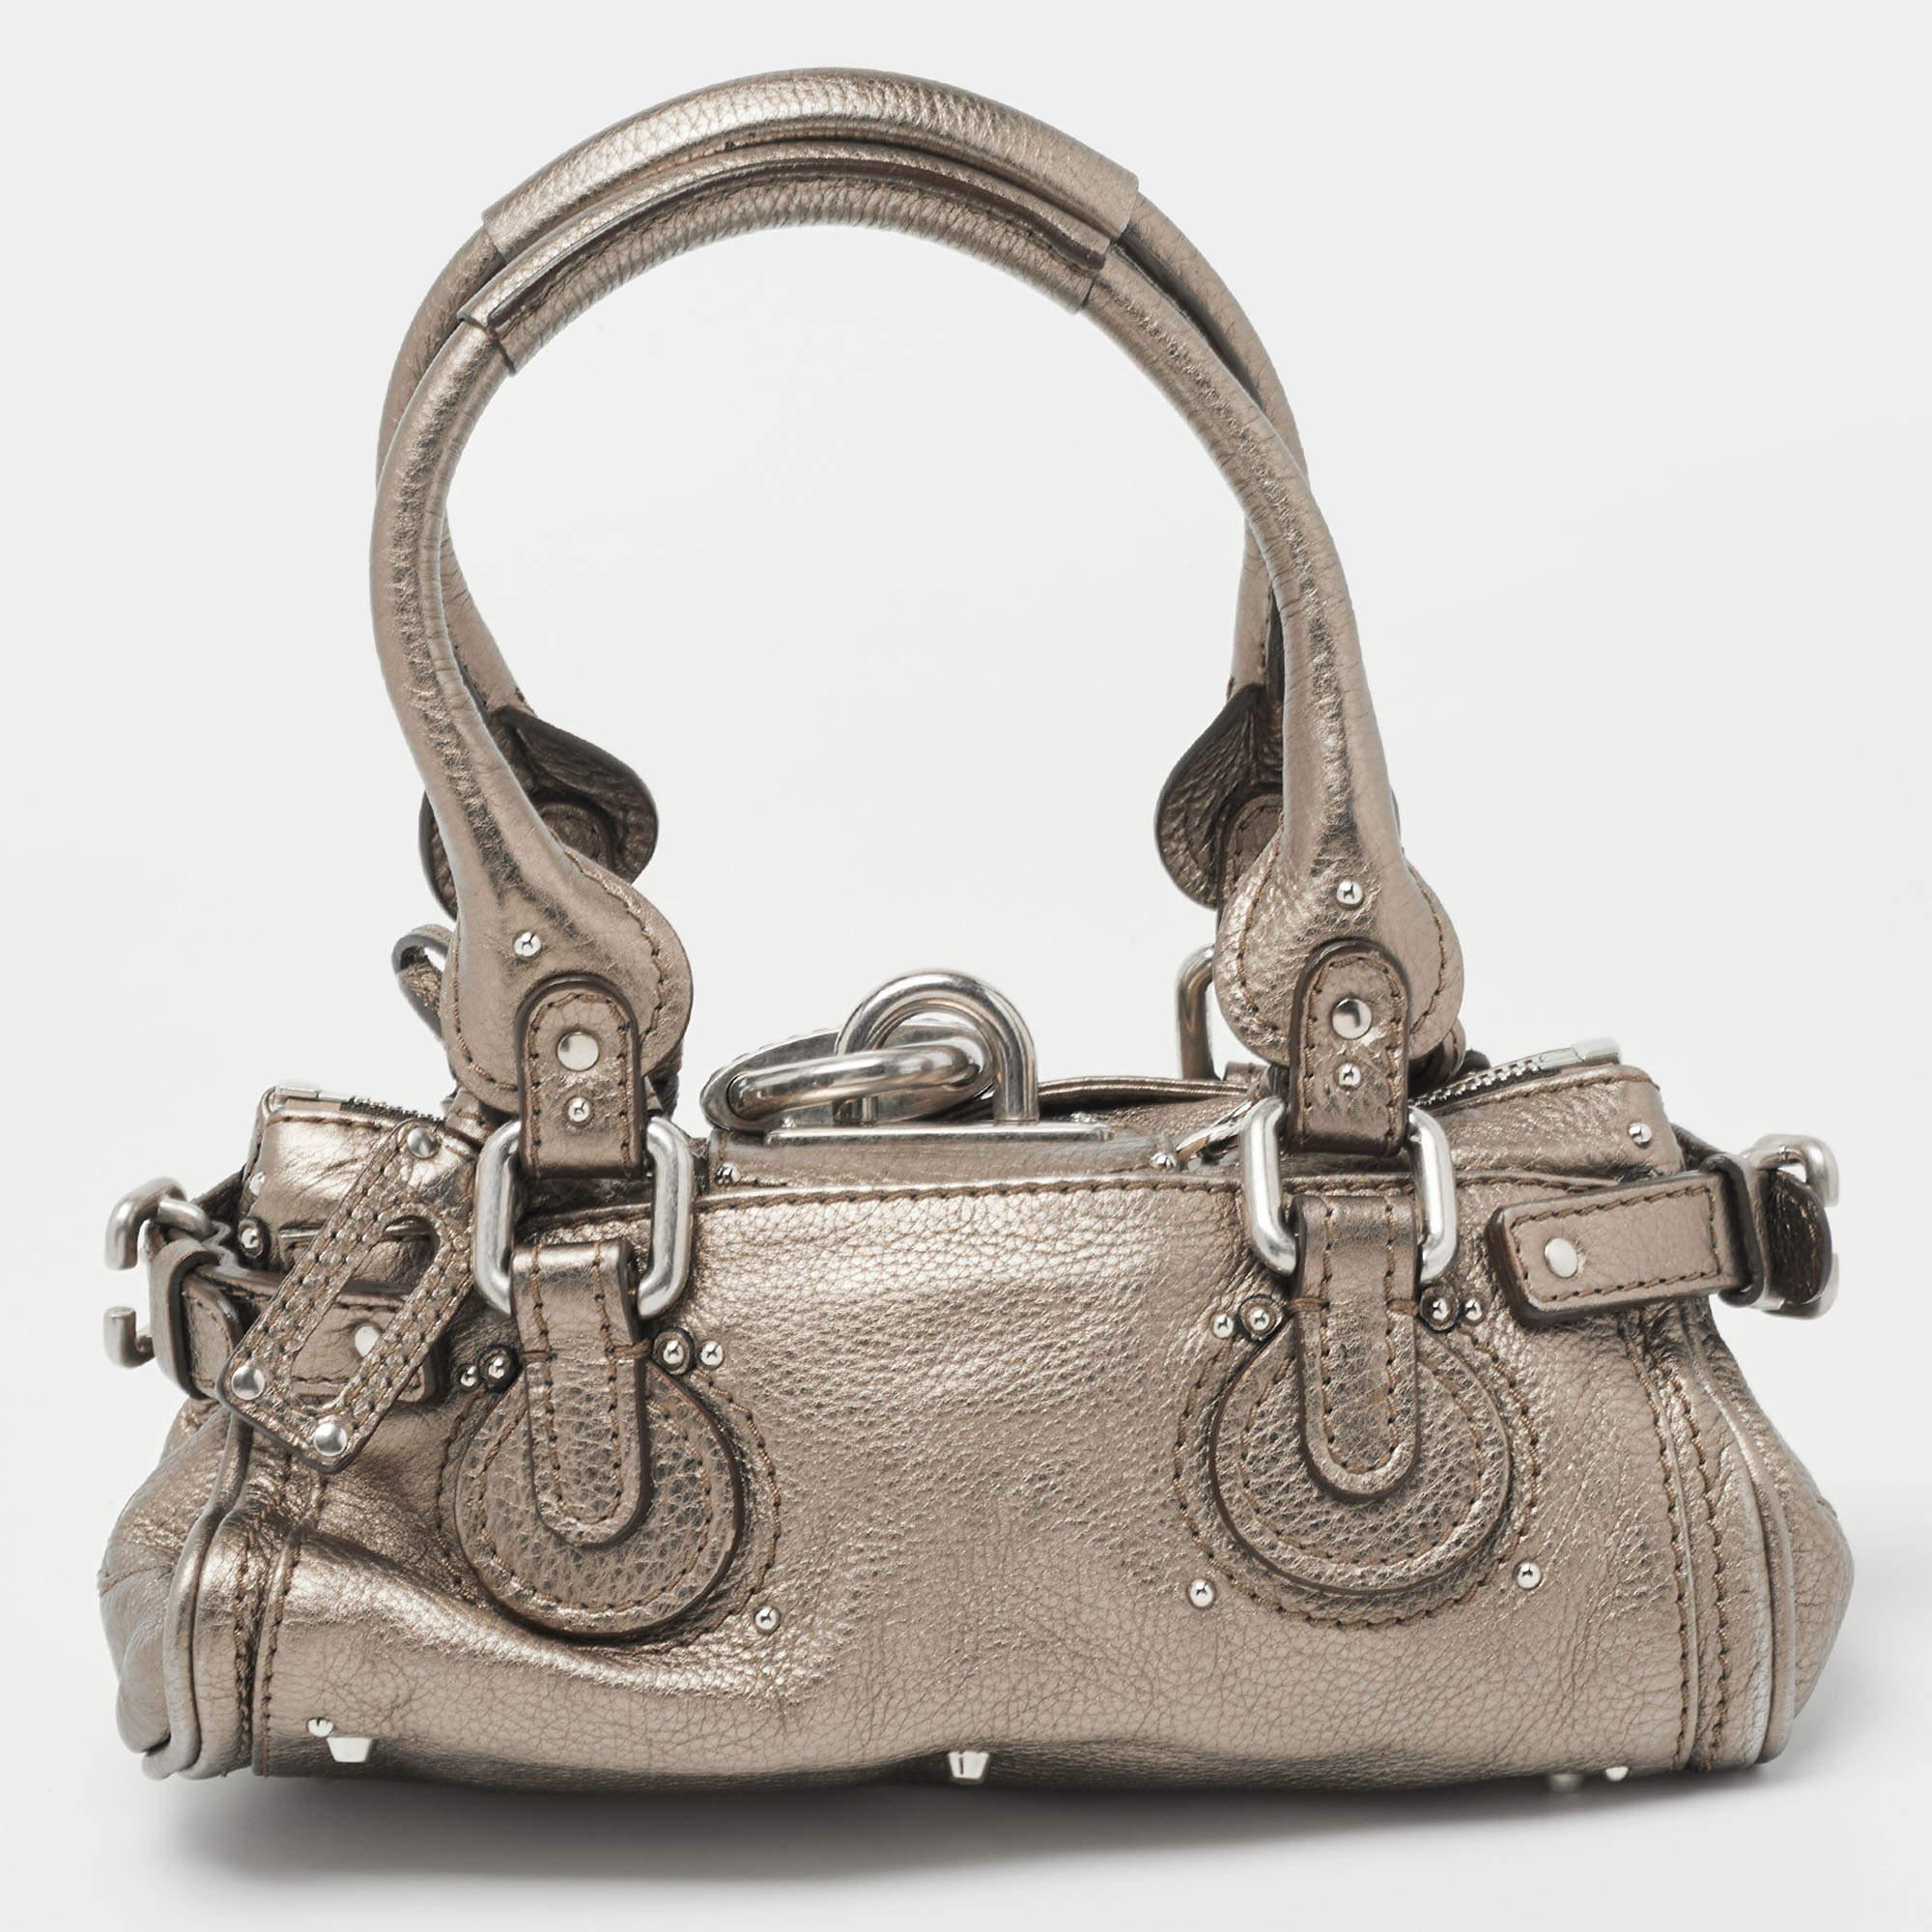 This Chloe Paddington satchel is built to assist your impeccable style on all days. Silver-tone hardware with a chunky lock on the front easily attracts all the attention. The metallic leather has an interesting texture while the fabric interior is